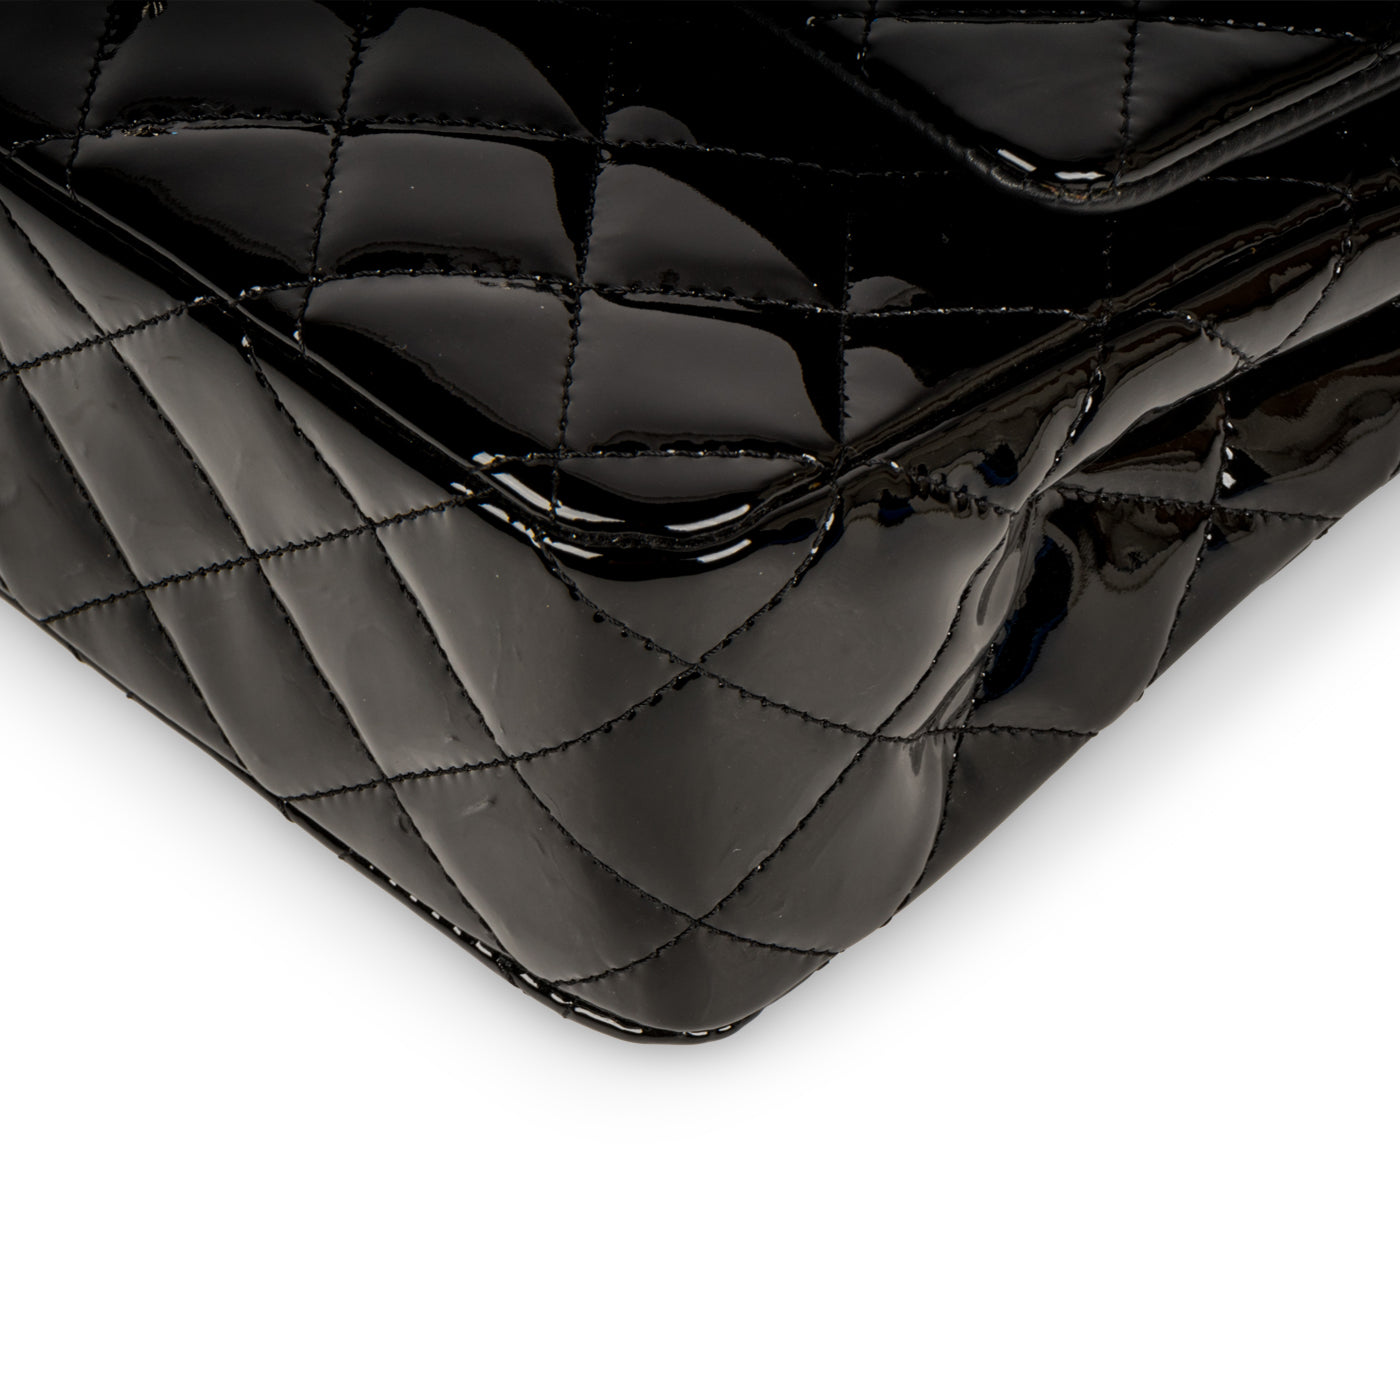 CHANEL Mini Classic Flap Charcoal Patent Quilted Bag - Chelsea